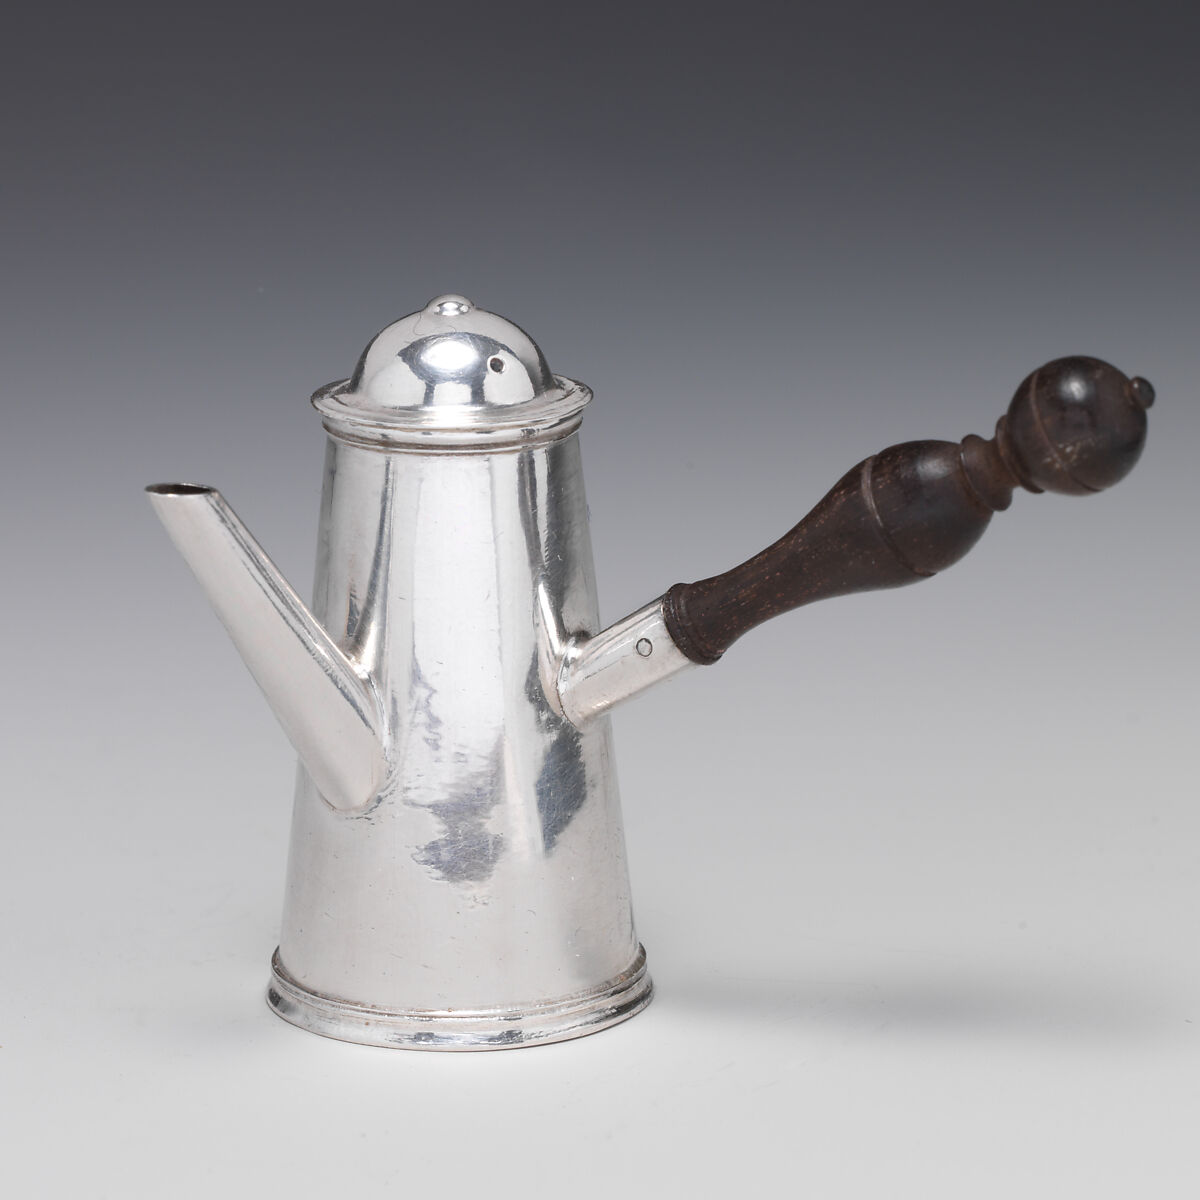 Miniature coffeepot with cover, David Clayton (British, active 1689), Silver, wood, British, London 